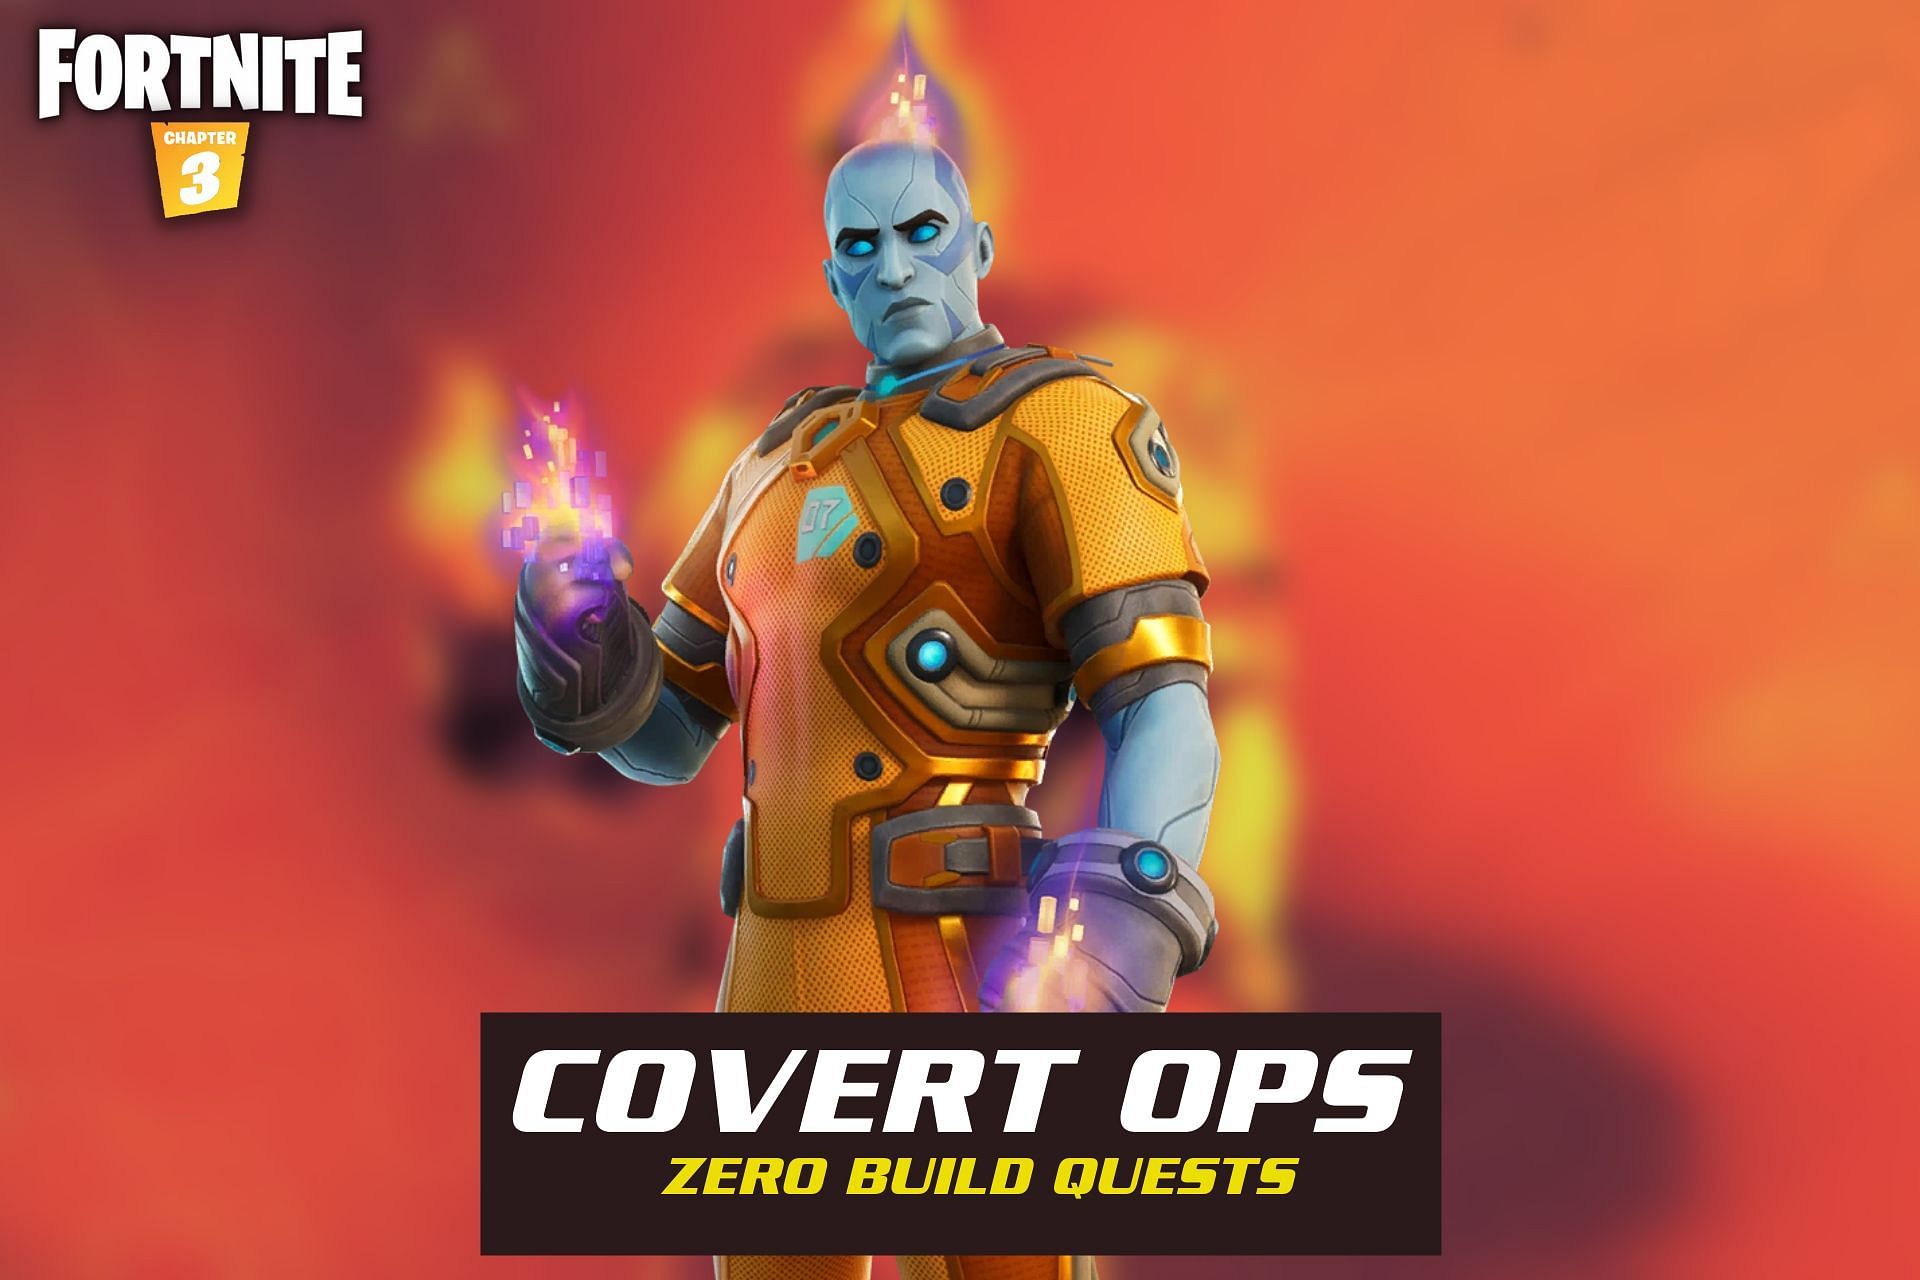 Help The Origin defeat the Imagined Order by undertaking the Covert Ops challenge in Fortnite Chapter 3 (Image via Sportskeeda)